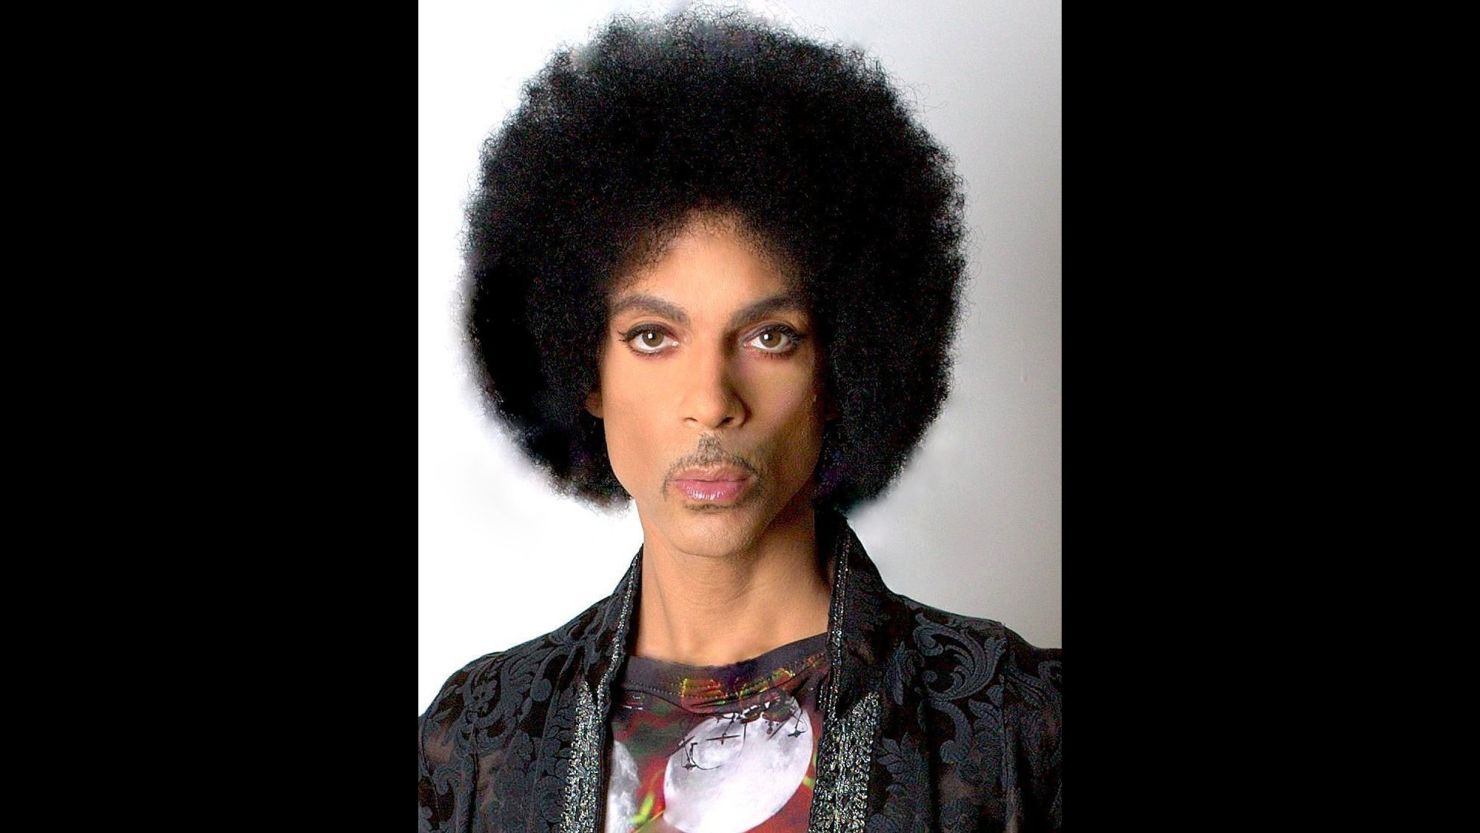 Prince's passport photo is pretty spectacular. 